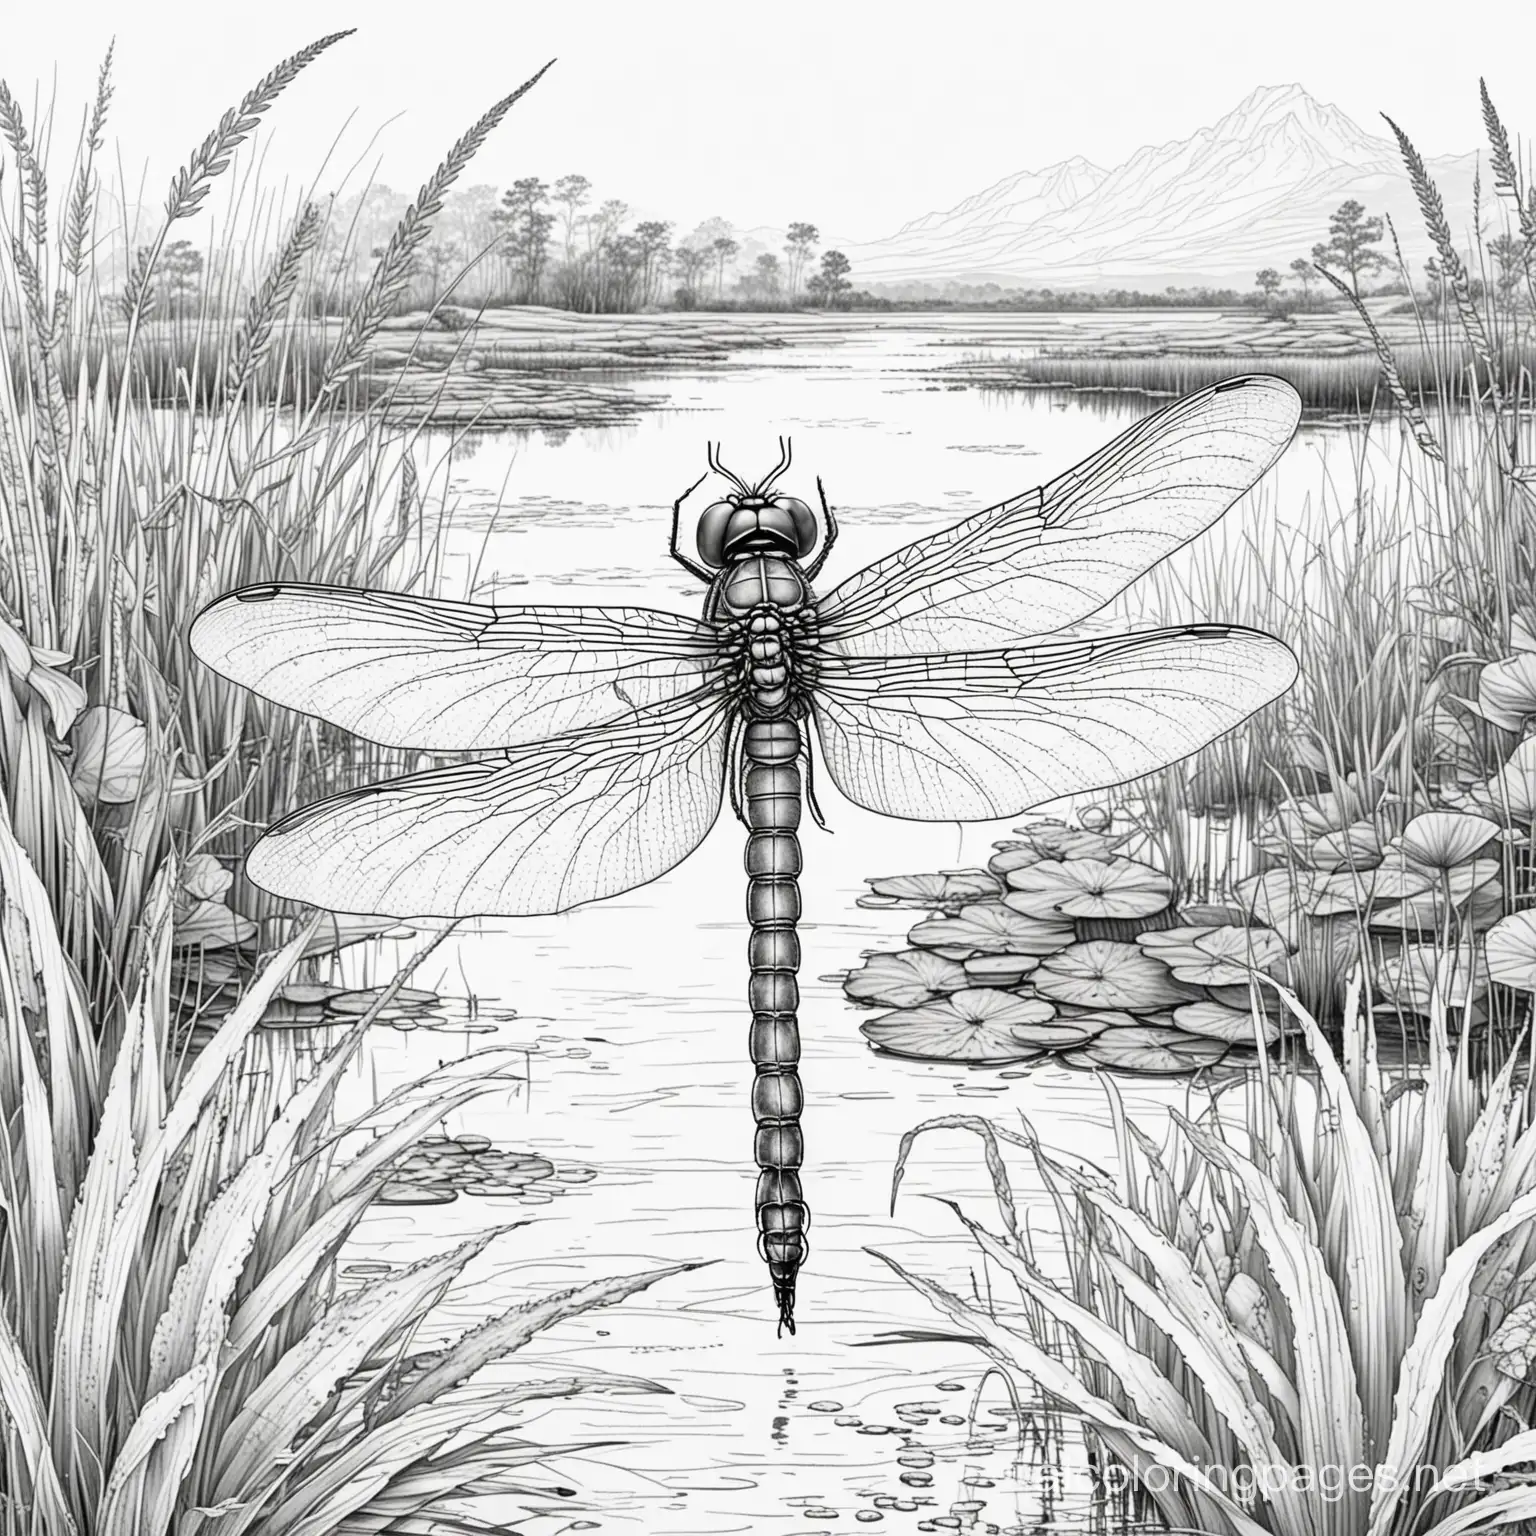 dragon fly in a marsh, fine lines, Coloring Page, black and white, line art, white background, Simplicity, Ample White Space. The background of the coloring page is plain white to make it easy for young children to color within the lines. The outlines of all the subjects are easy to distinguish, making it simple for kids to color without too much difficulty